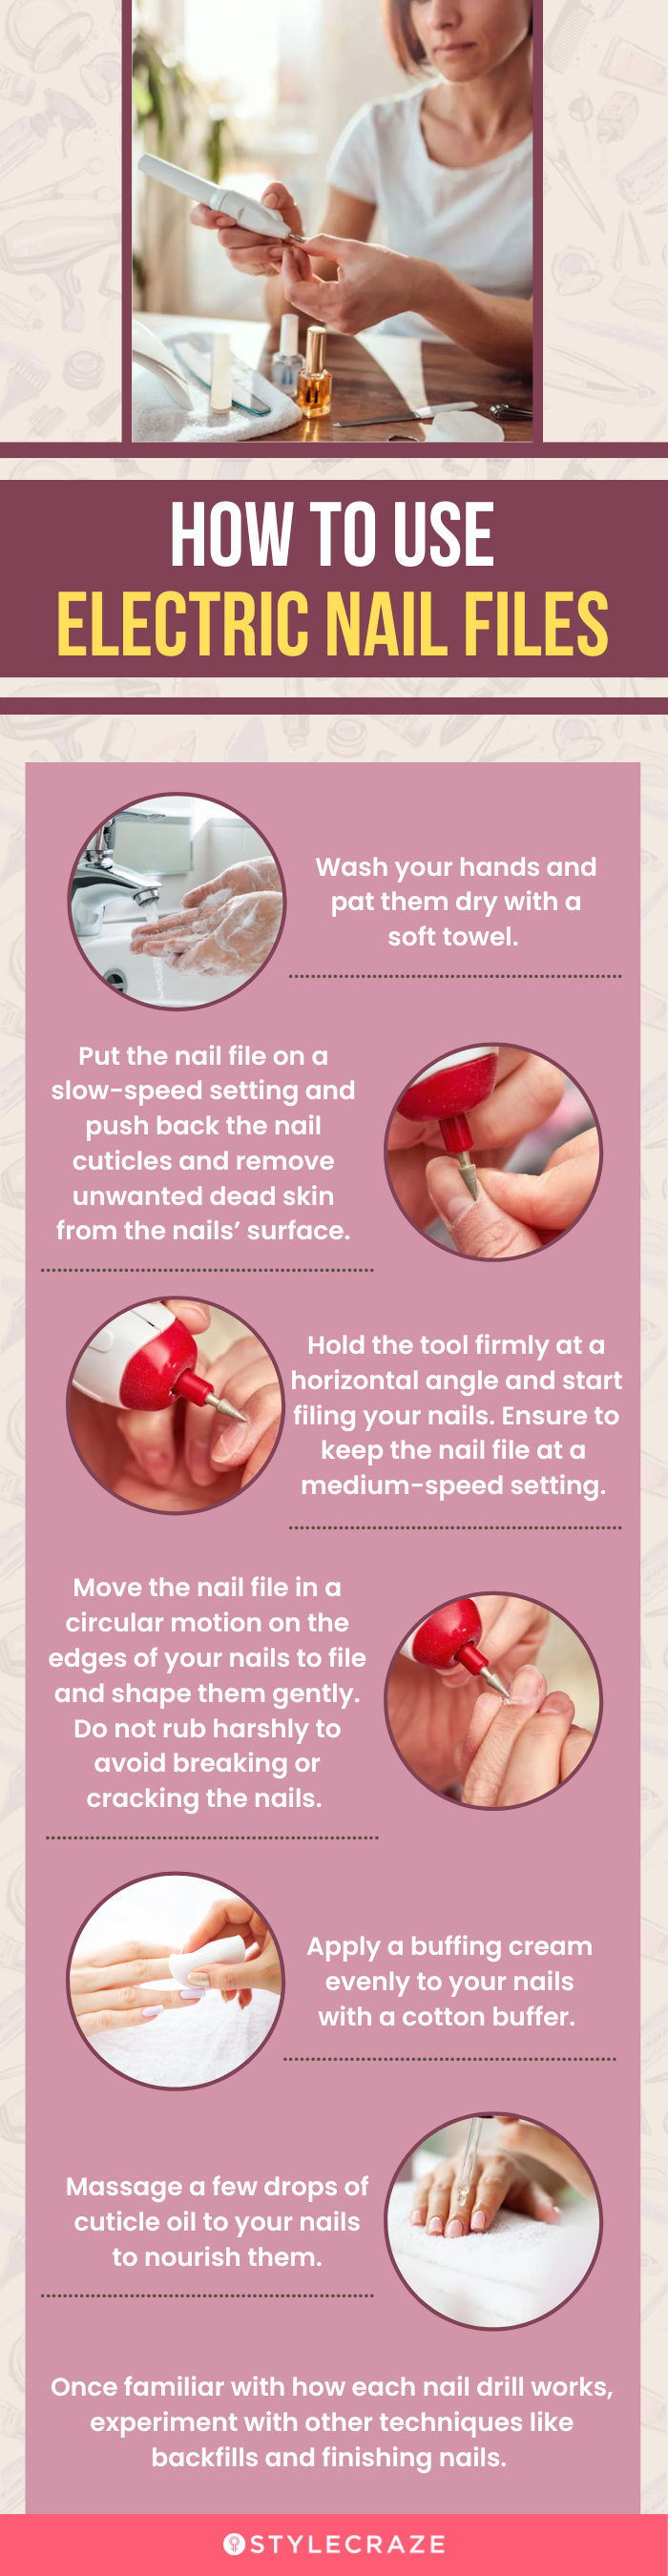 How To Use Electric Nail Files (infographic)